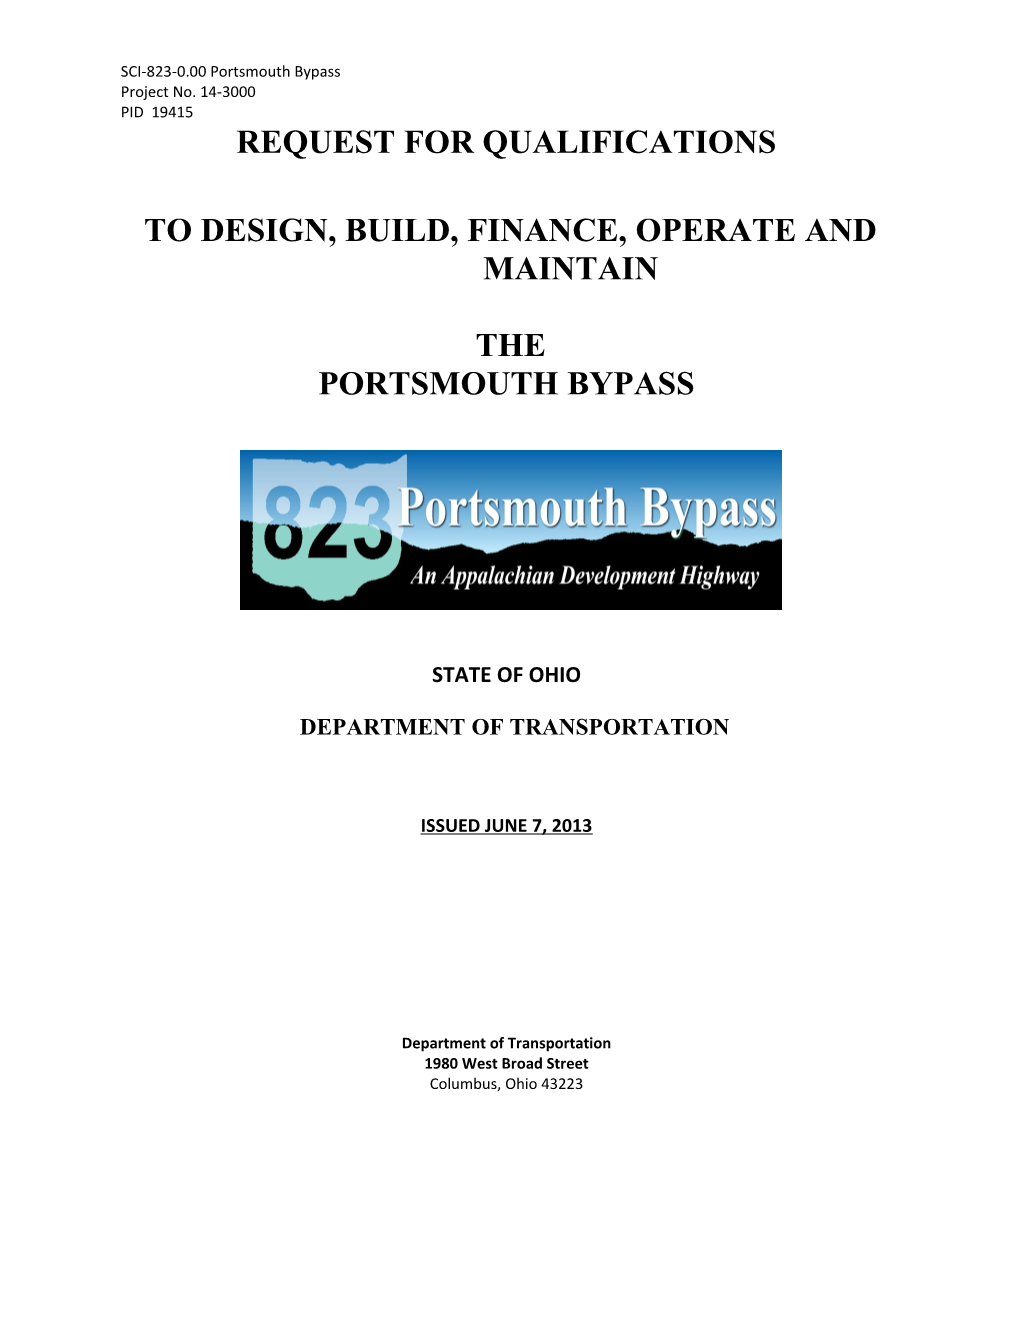 Portsmouth Bypass RFQ Partc - Forms (6-7-2013)